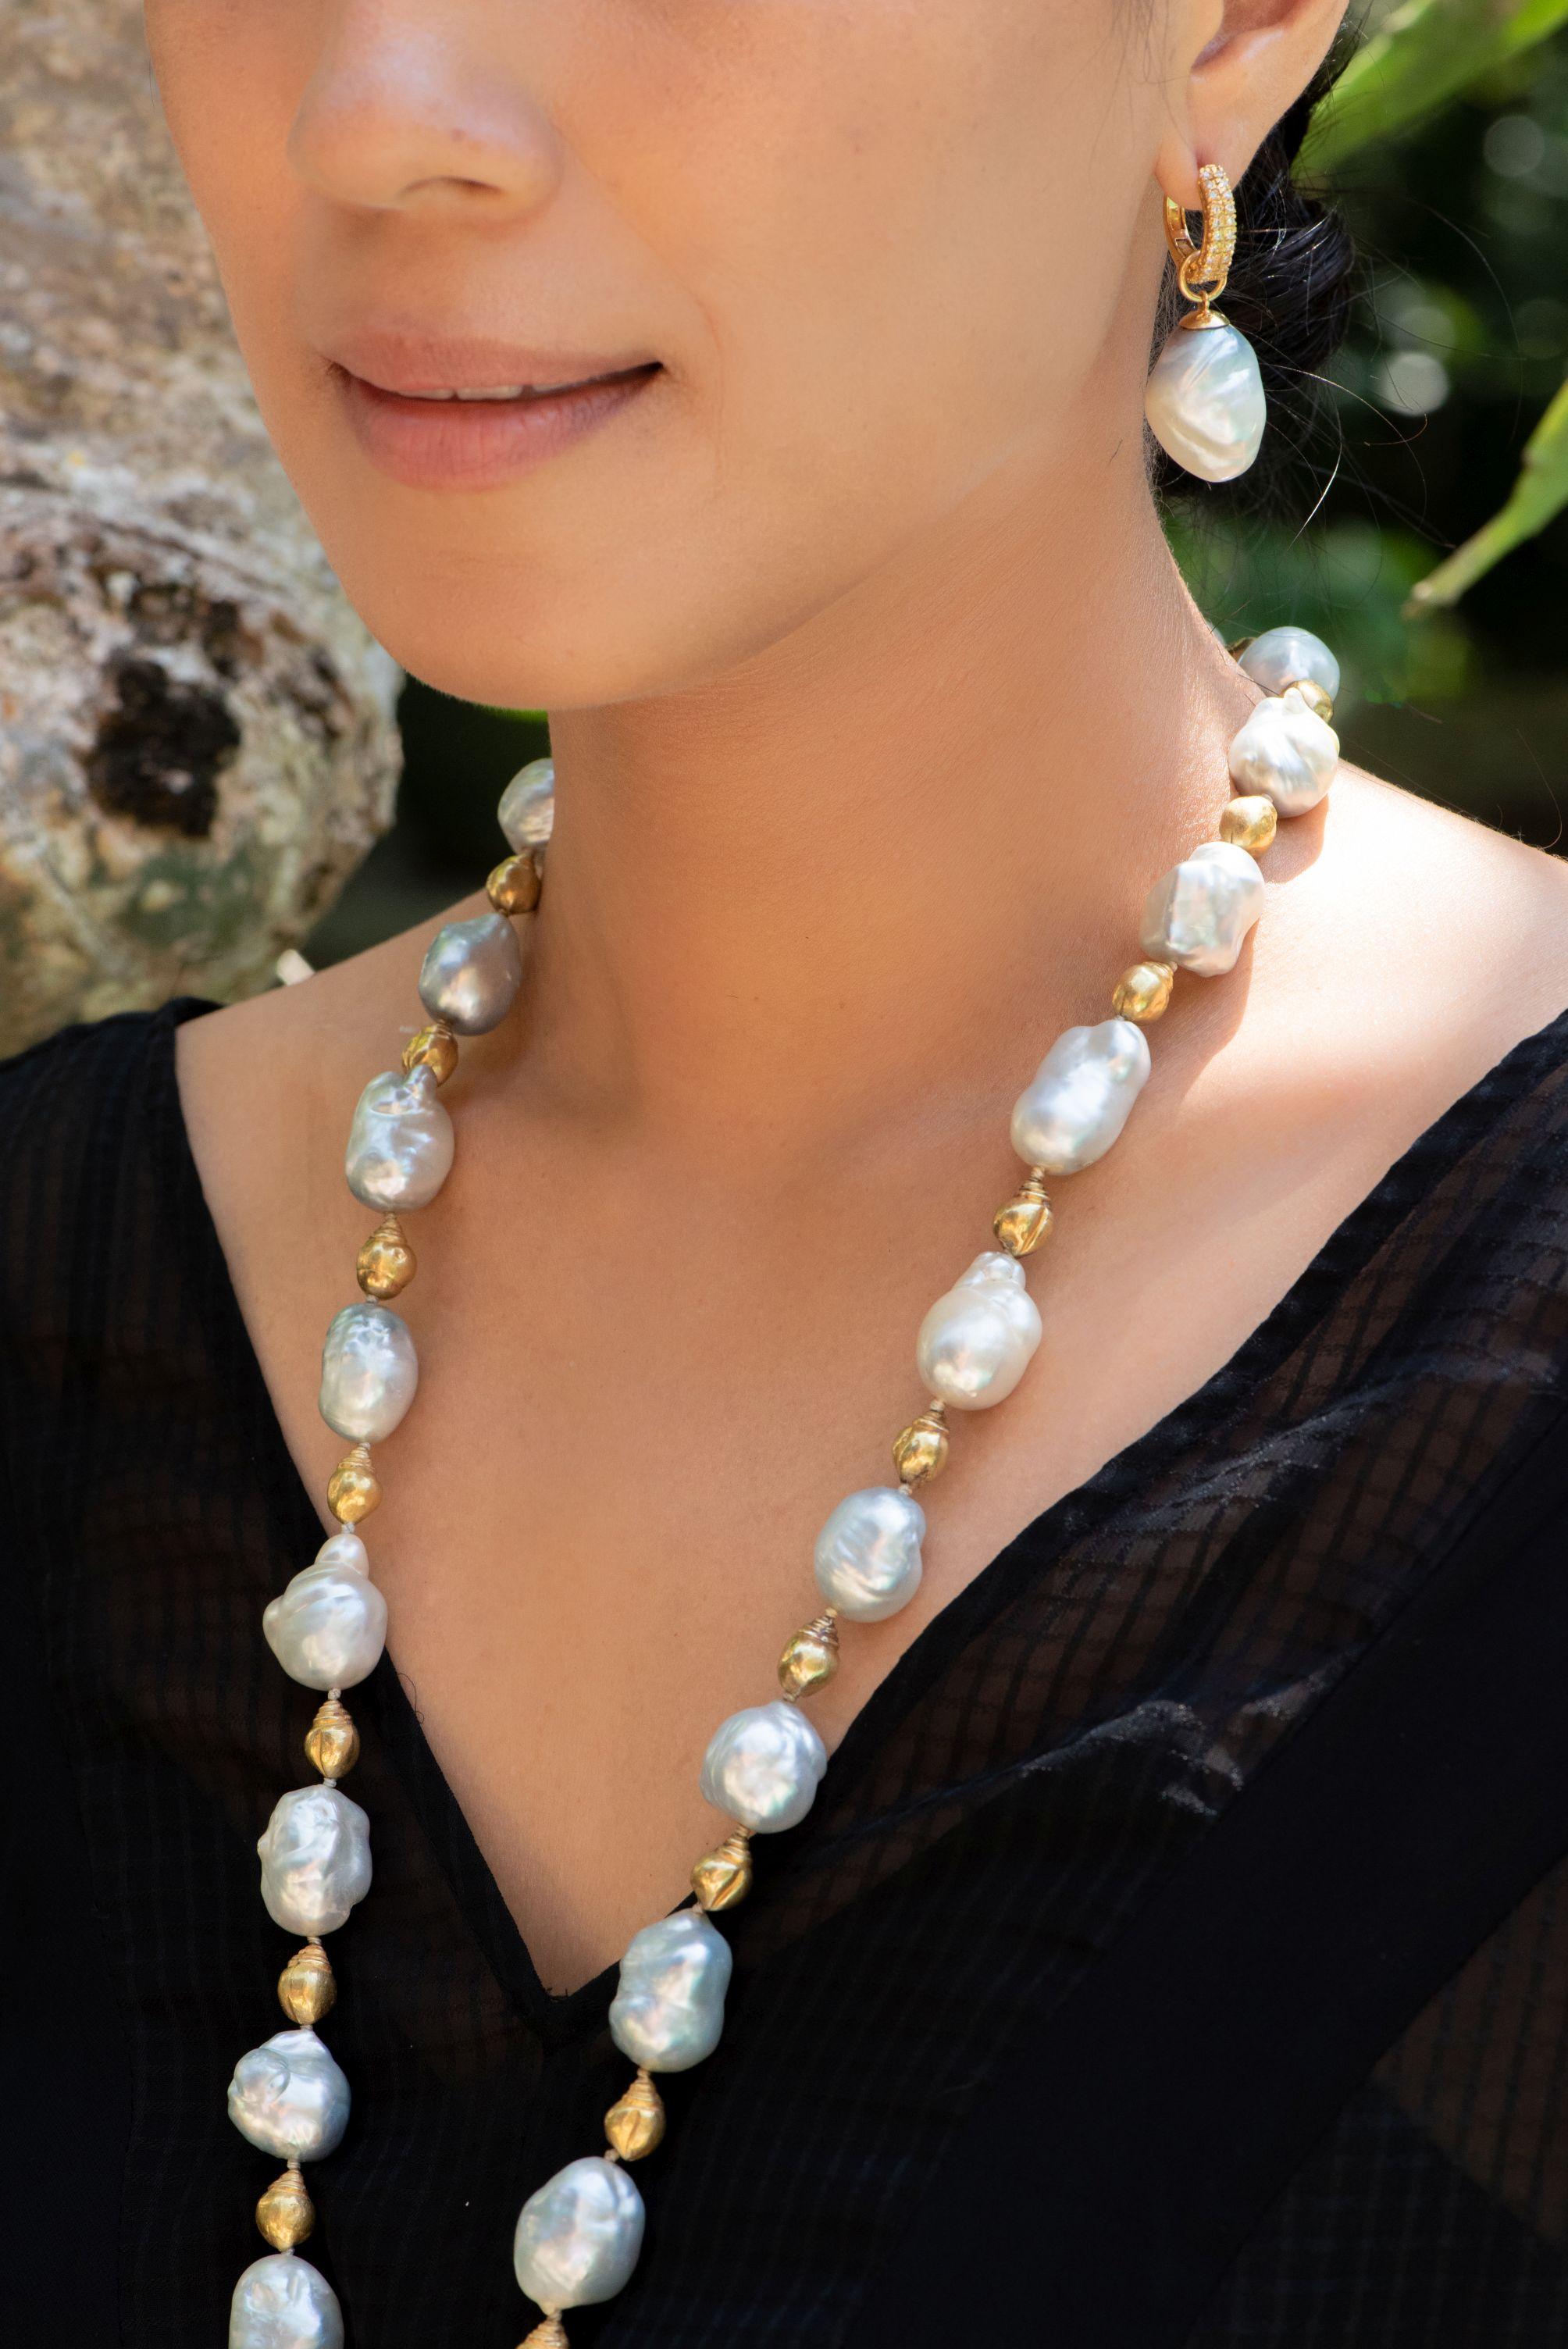 14 Century Gold Beads Oversized Blueish Baroque South Sea Pearls Beaded Necklace In Good Condition For Sale In Singapore, SG